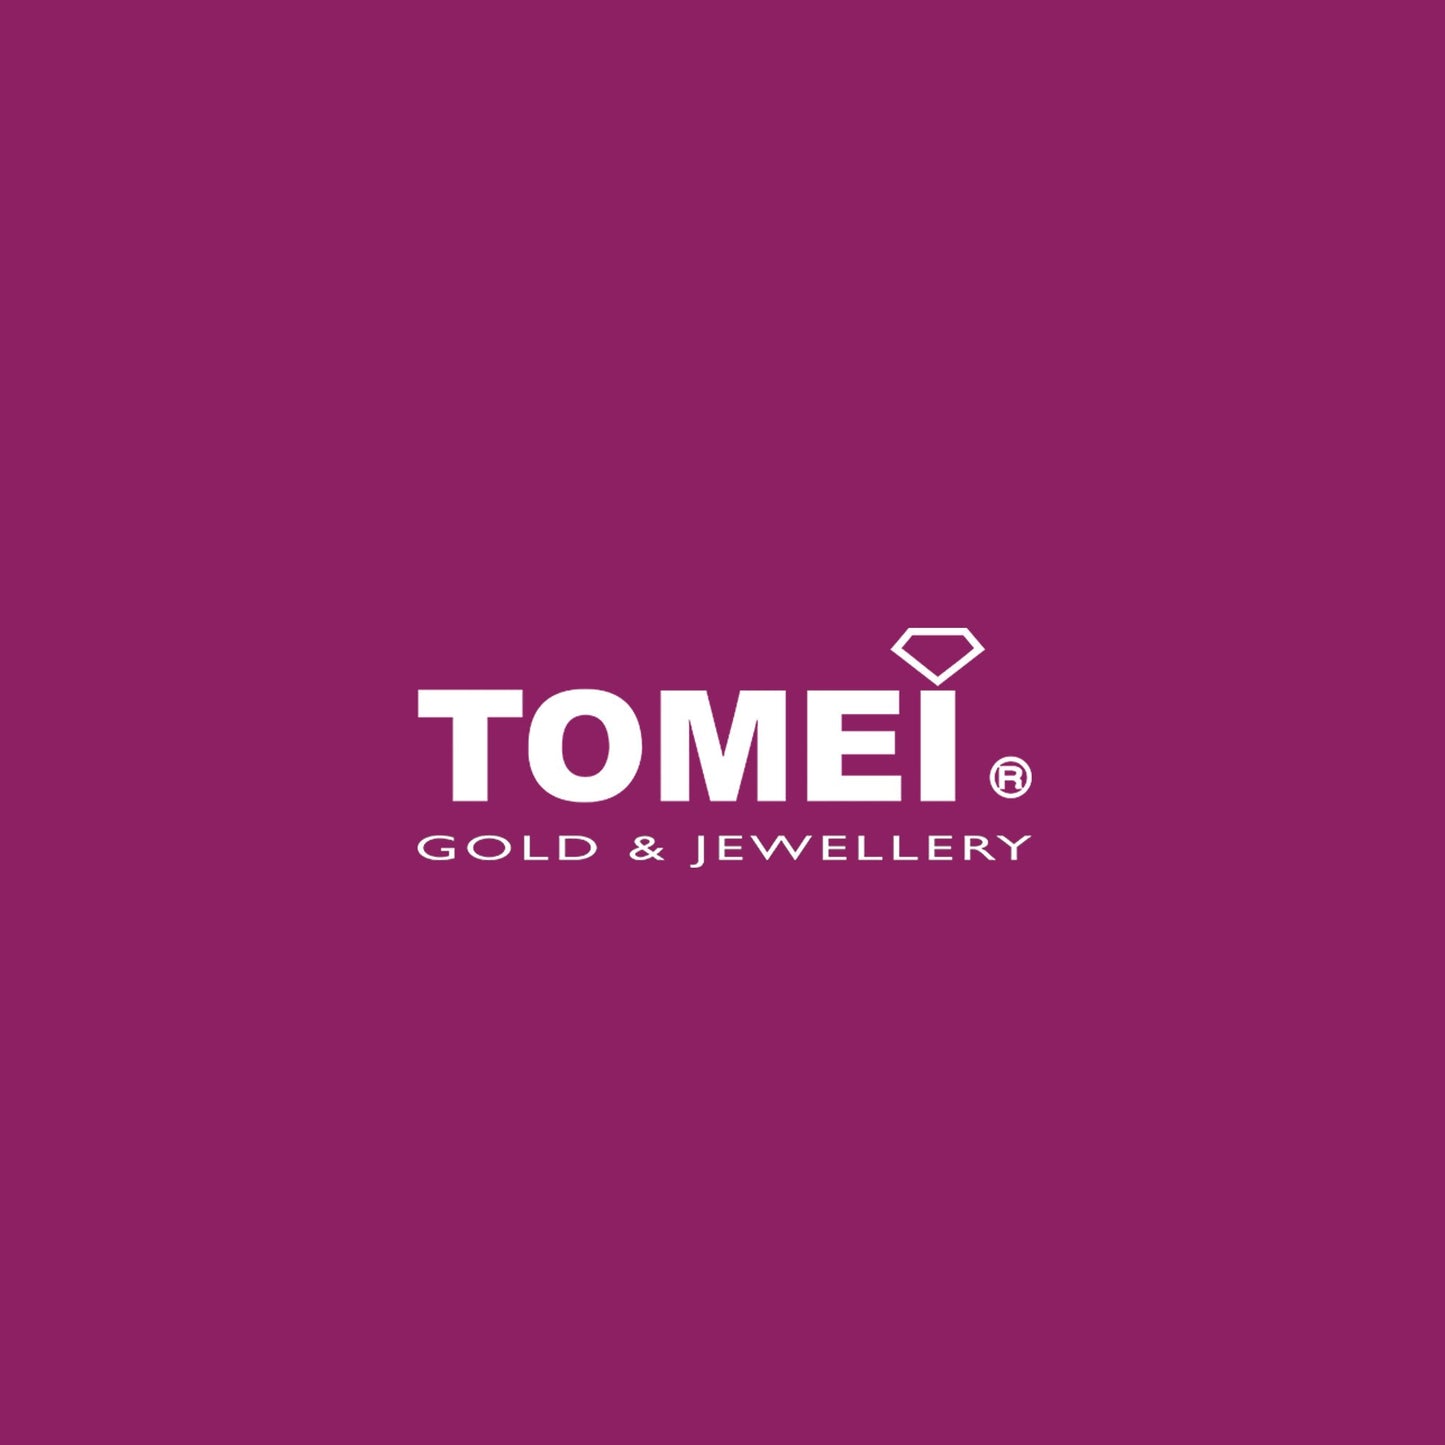 TOMEI Love Is Beautiful Collection Pearl Pendant Set, White Gold 585